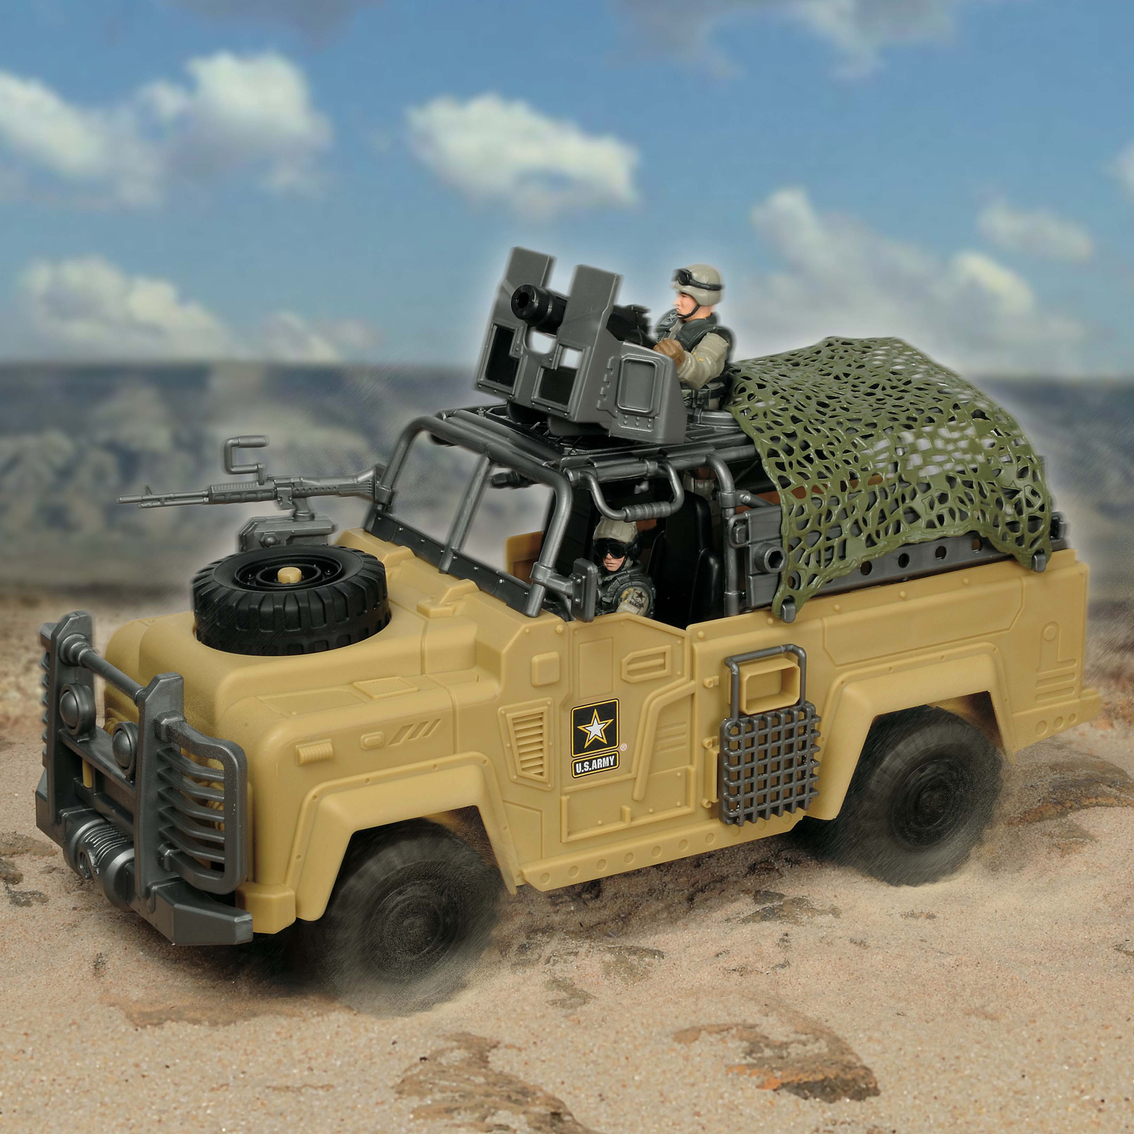 Excite U.S. Army Playset - Image 2 of 3